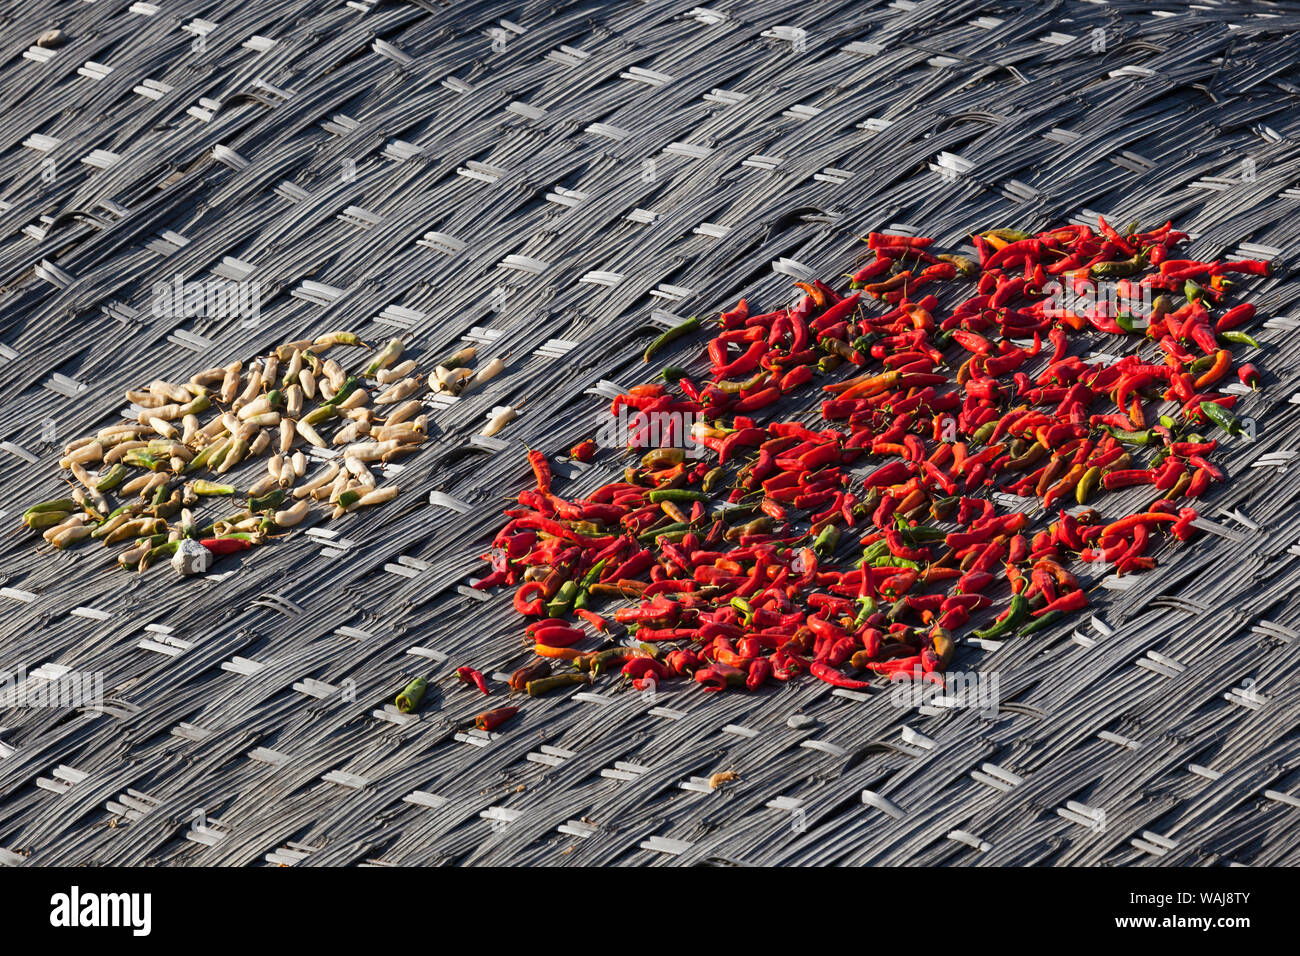 Bhutan. Trongsa region. Red and while chilies dry on a rooftop. Stock Photo